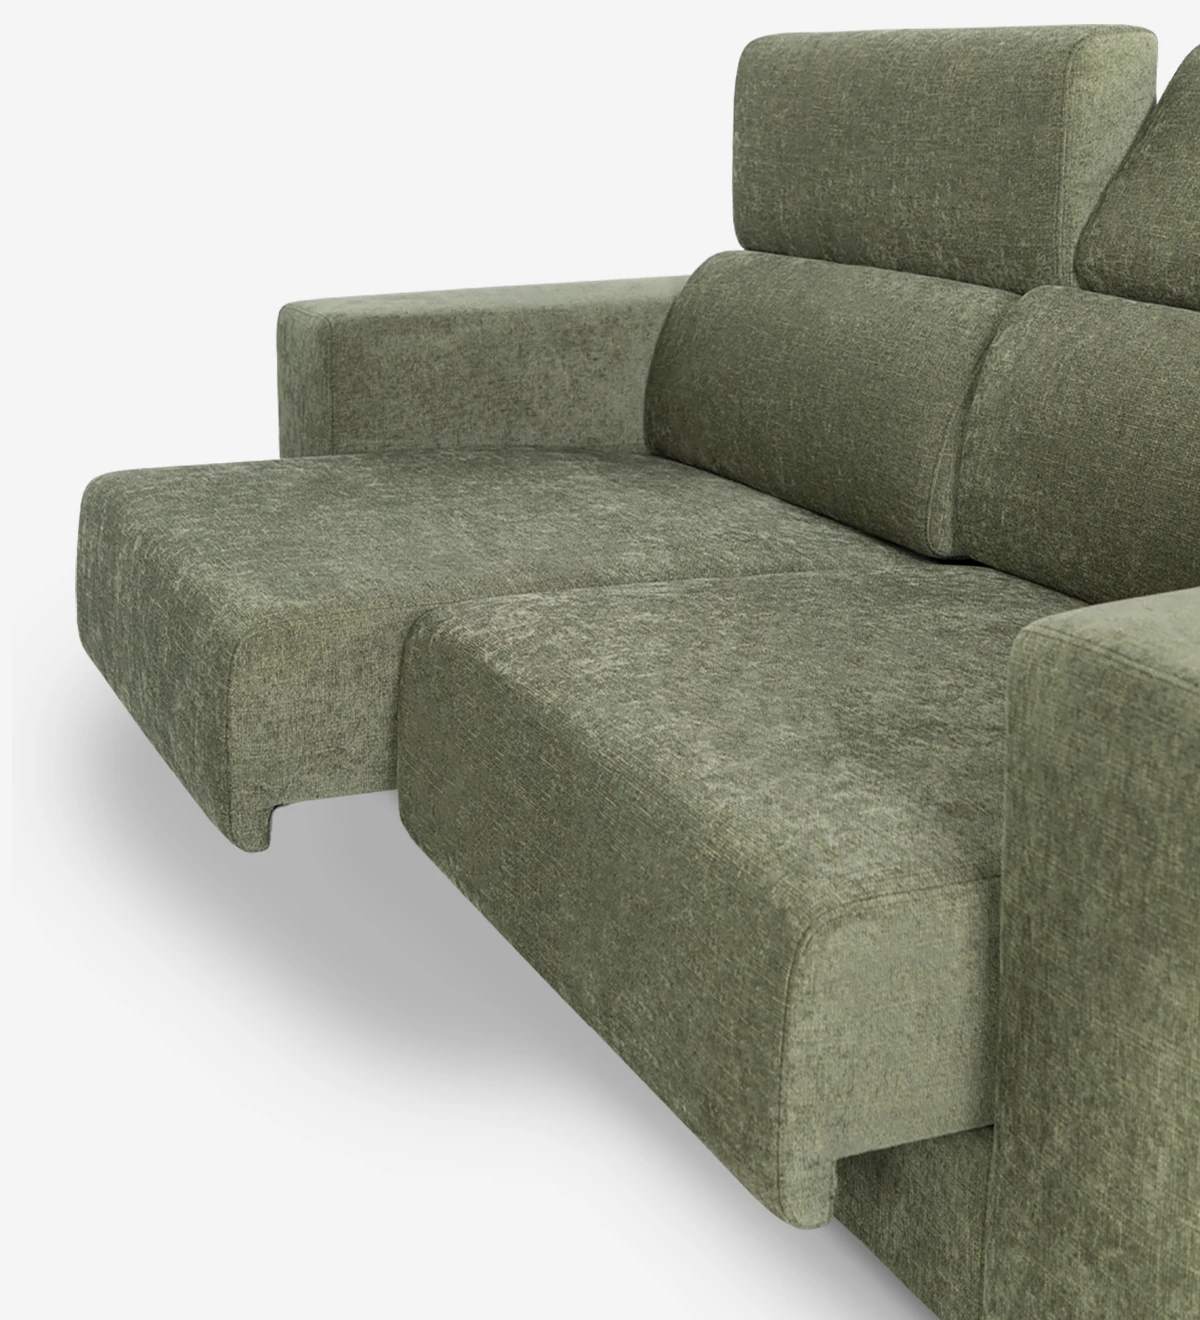 Oporto 2-seater sofa upholstered in green fabric, reclining headrests and sliding seats, 203 cm.